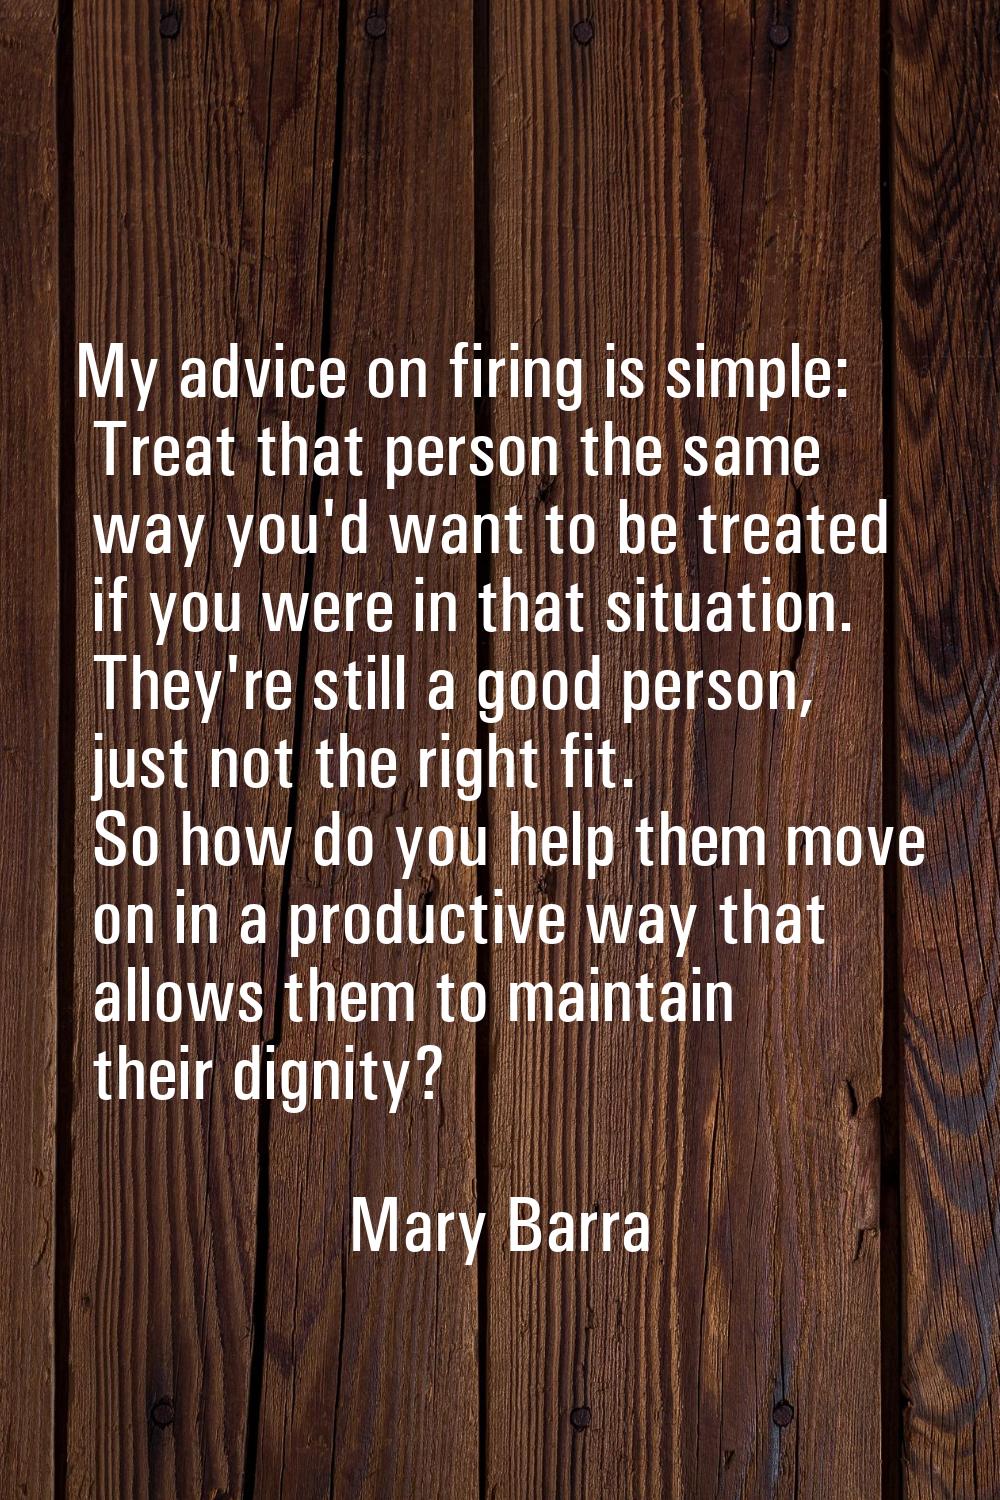 My advice on firing is simple: Treat that person the same way you'd want to be treated if you were 